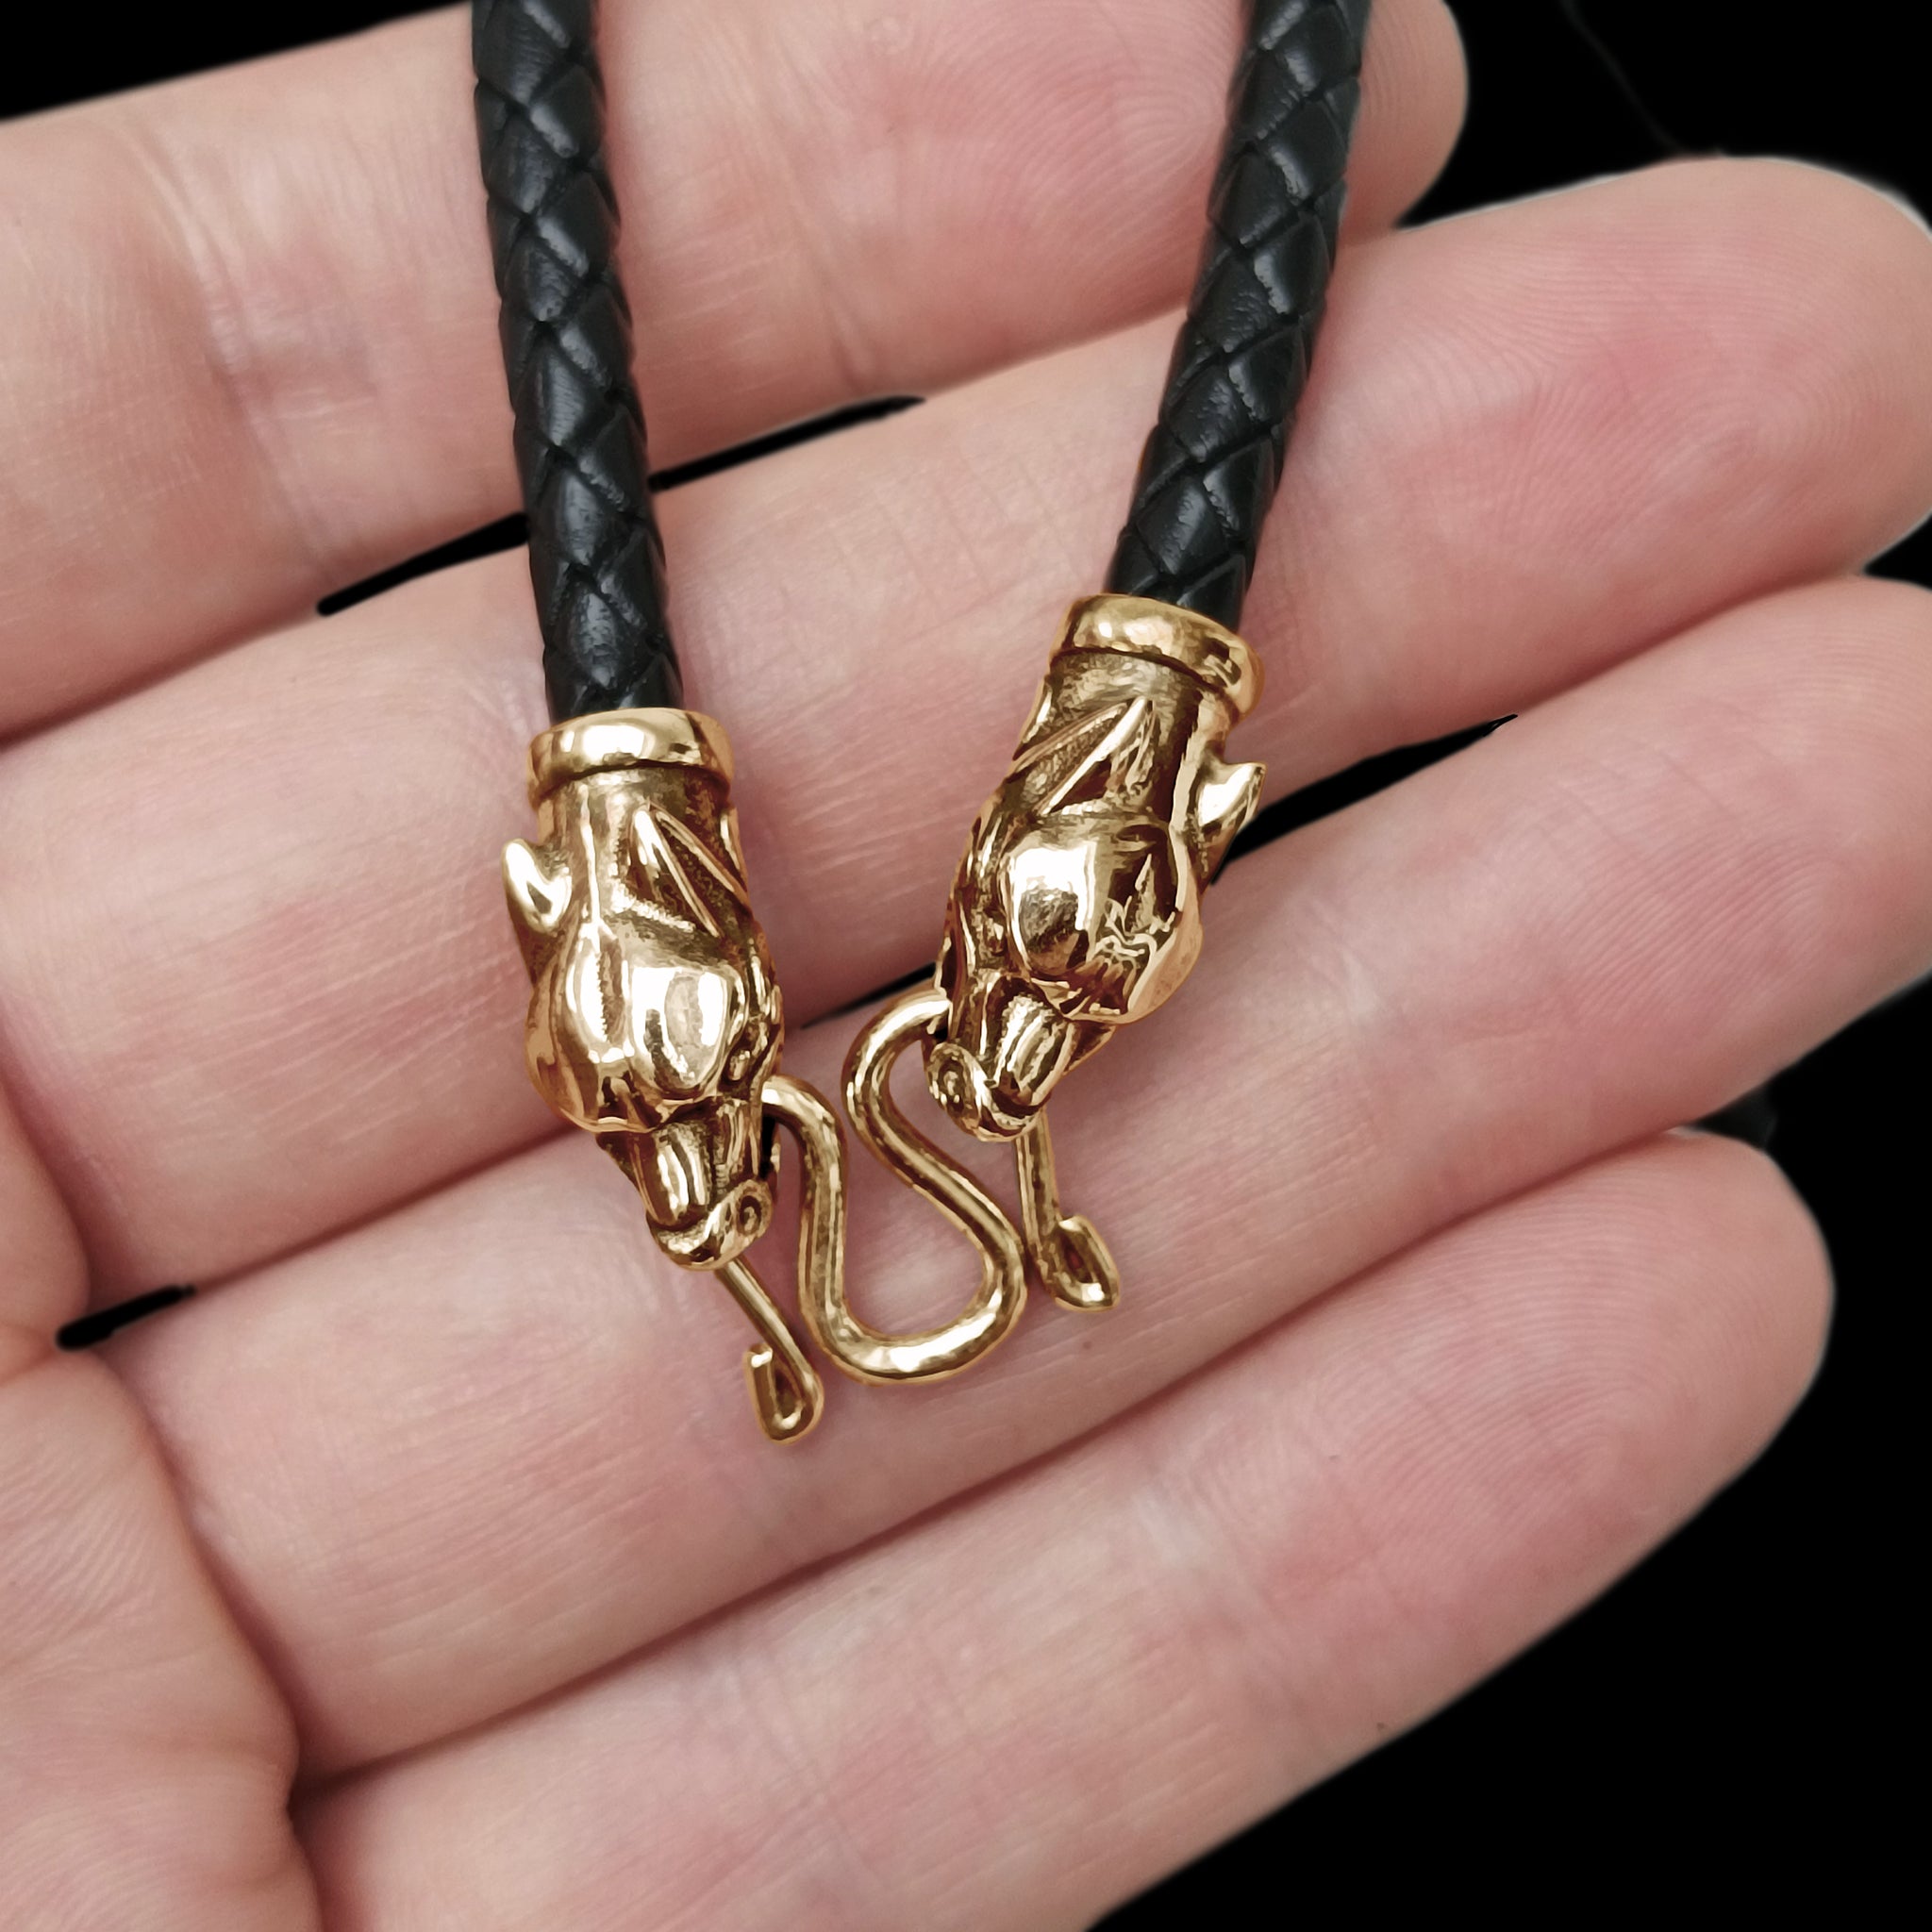 5mm Width Braided Leather Necklace with Bronze Ferocious Wolf Heads and Butterfly Fitting in Hand